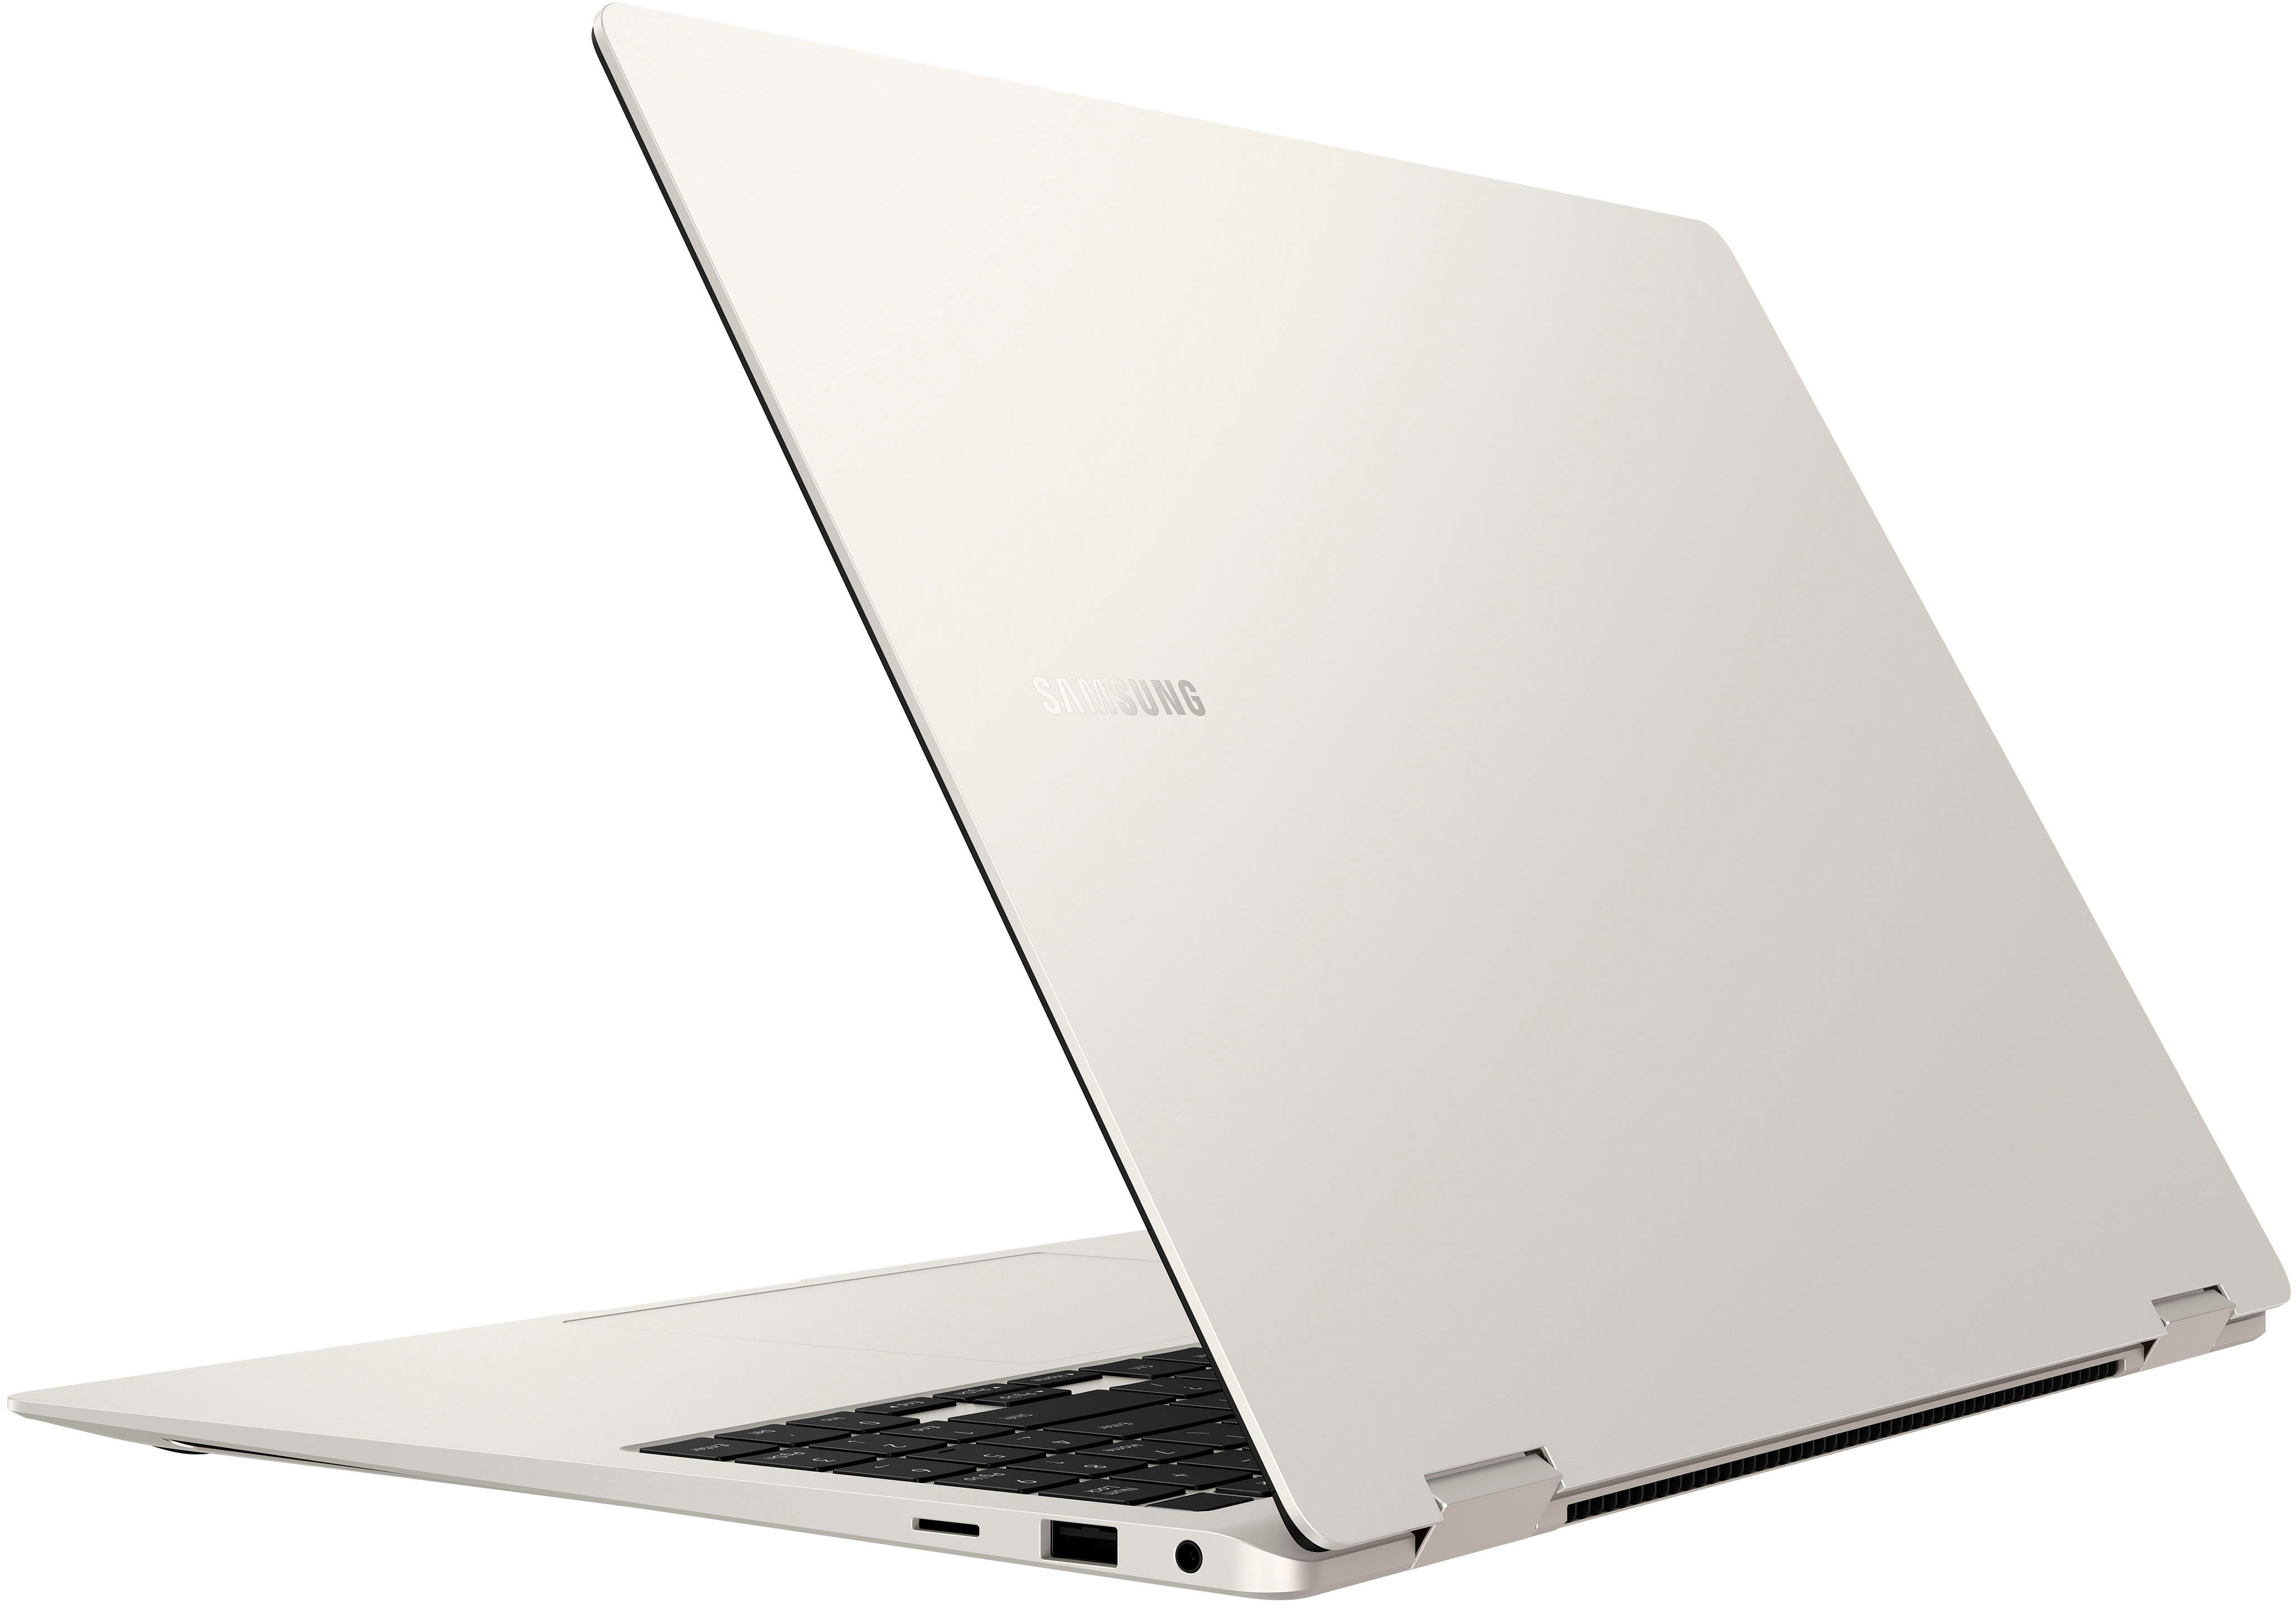 Samsung Galaxy Book 3 Pro, Book 3 Pro 360 images and specs leak - SamMobile